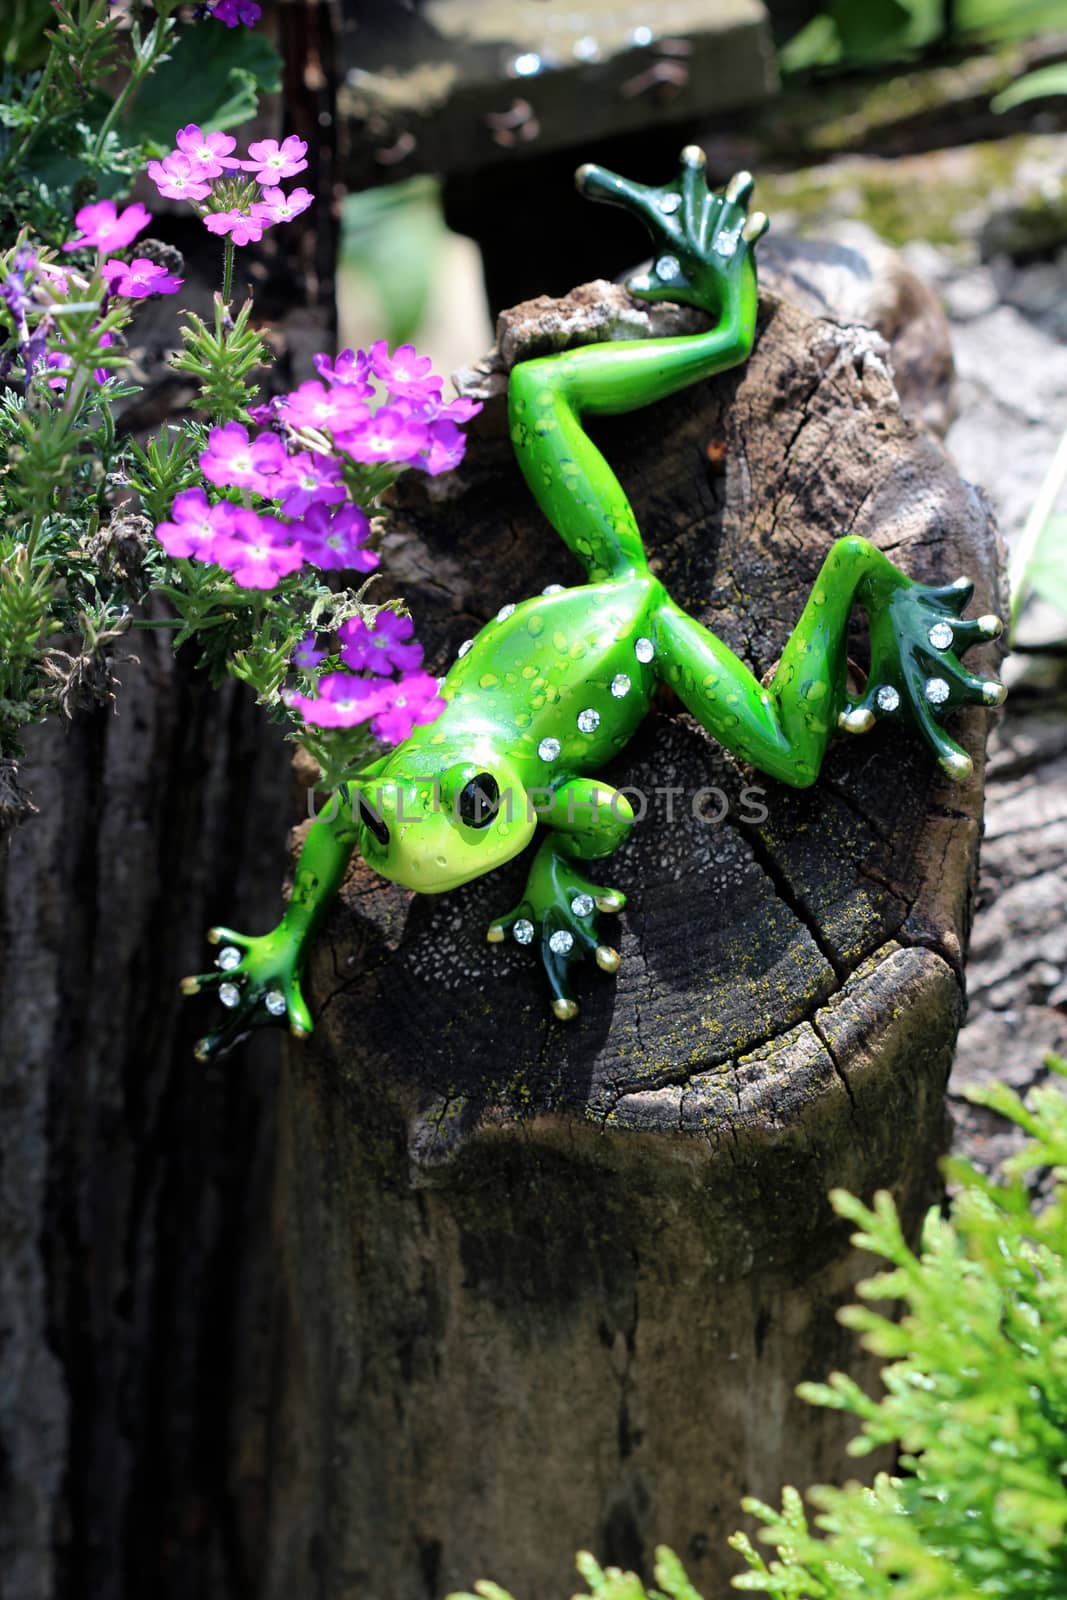 This ornamental green frog is decorated with white crystal rhinestone jewels.